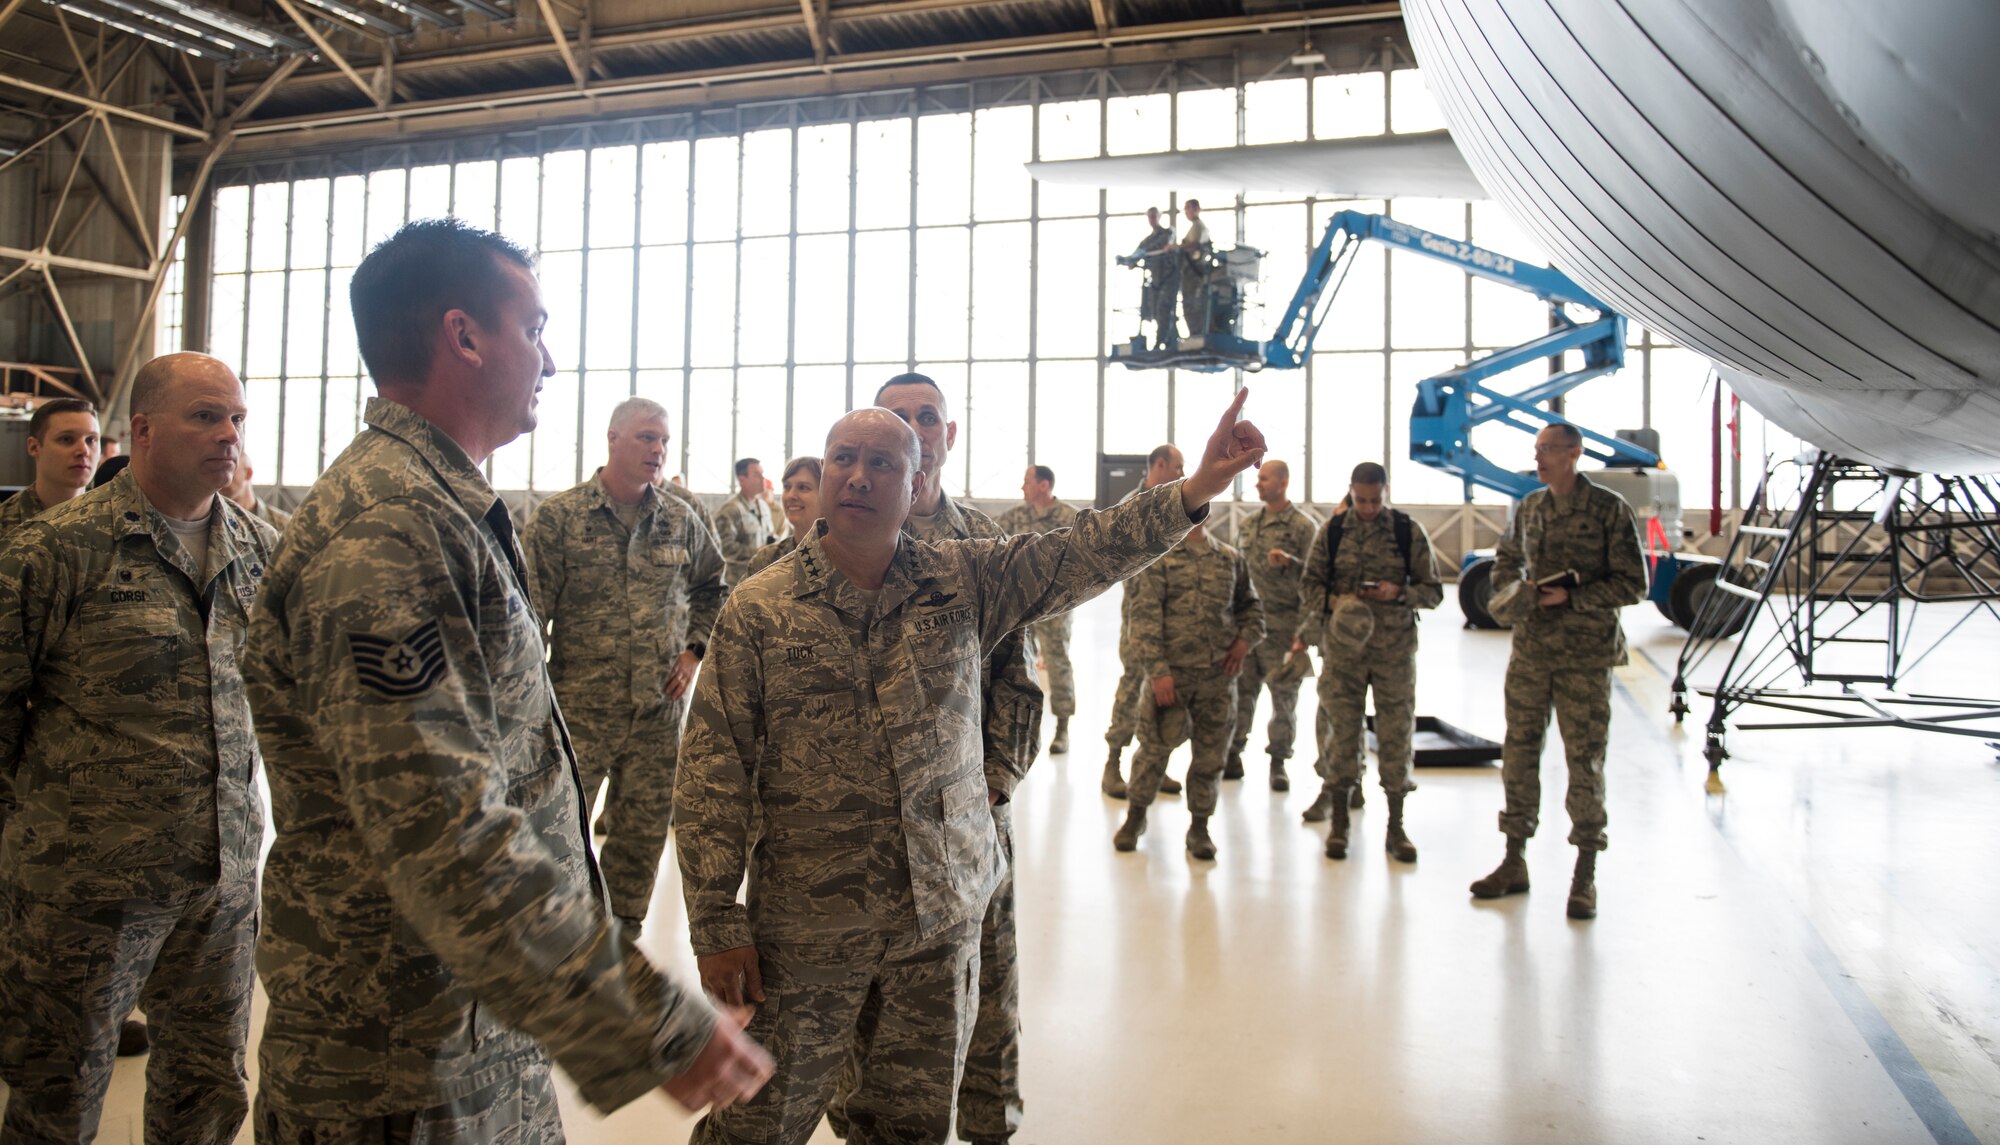 Lt. Gen. GI Tuck, 18th Air Force commander, and Chief Master Sgt. Todd Petzel, 18th AF command chief, are shown an isochronal inspection during a mission immersion March 20, 2018, at Fairchild Air Force Base, Washington. The tour familiarized 18th AF leadership with the Fairchild mission and the Airmen who make it happen. (U.S. Air Force photo/Senior Airman Sean Campbell)